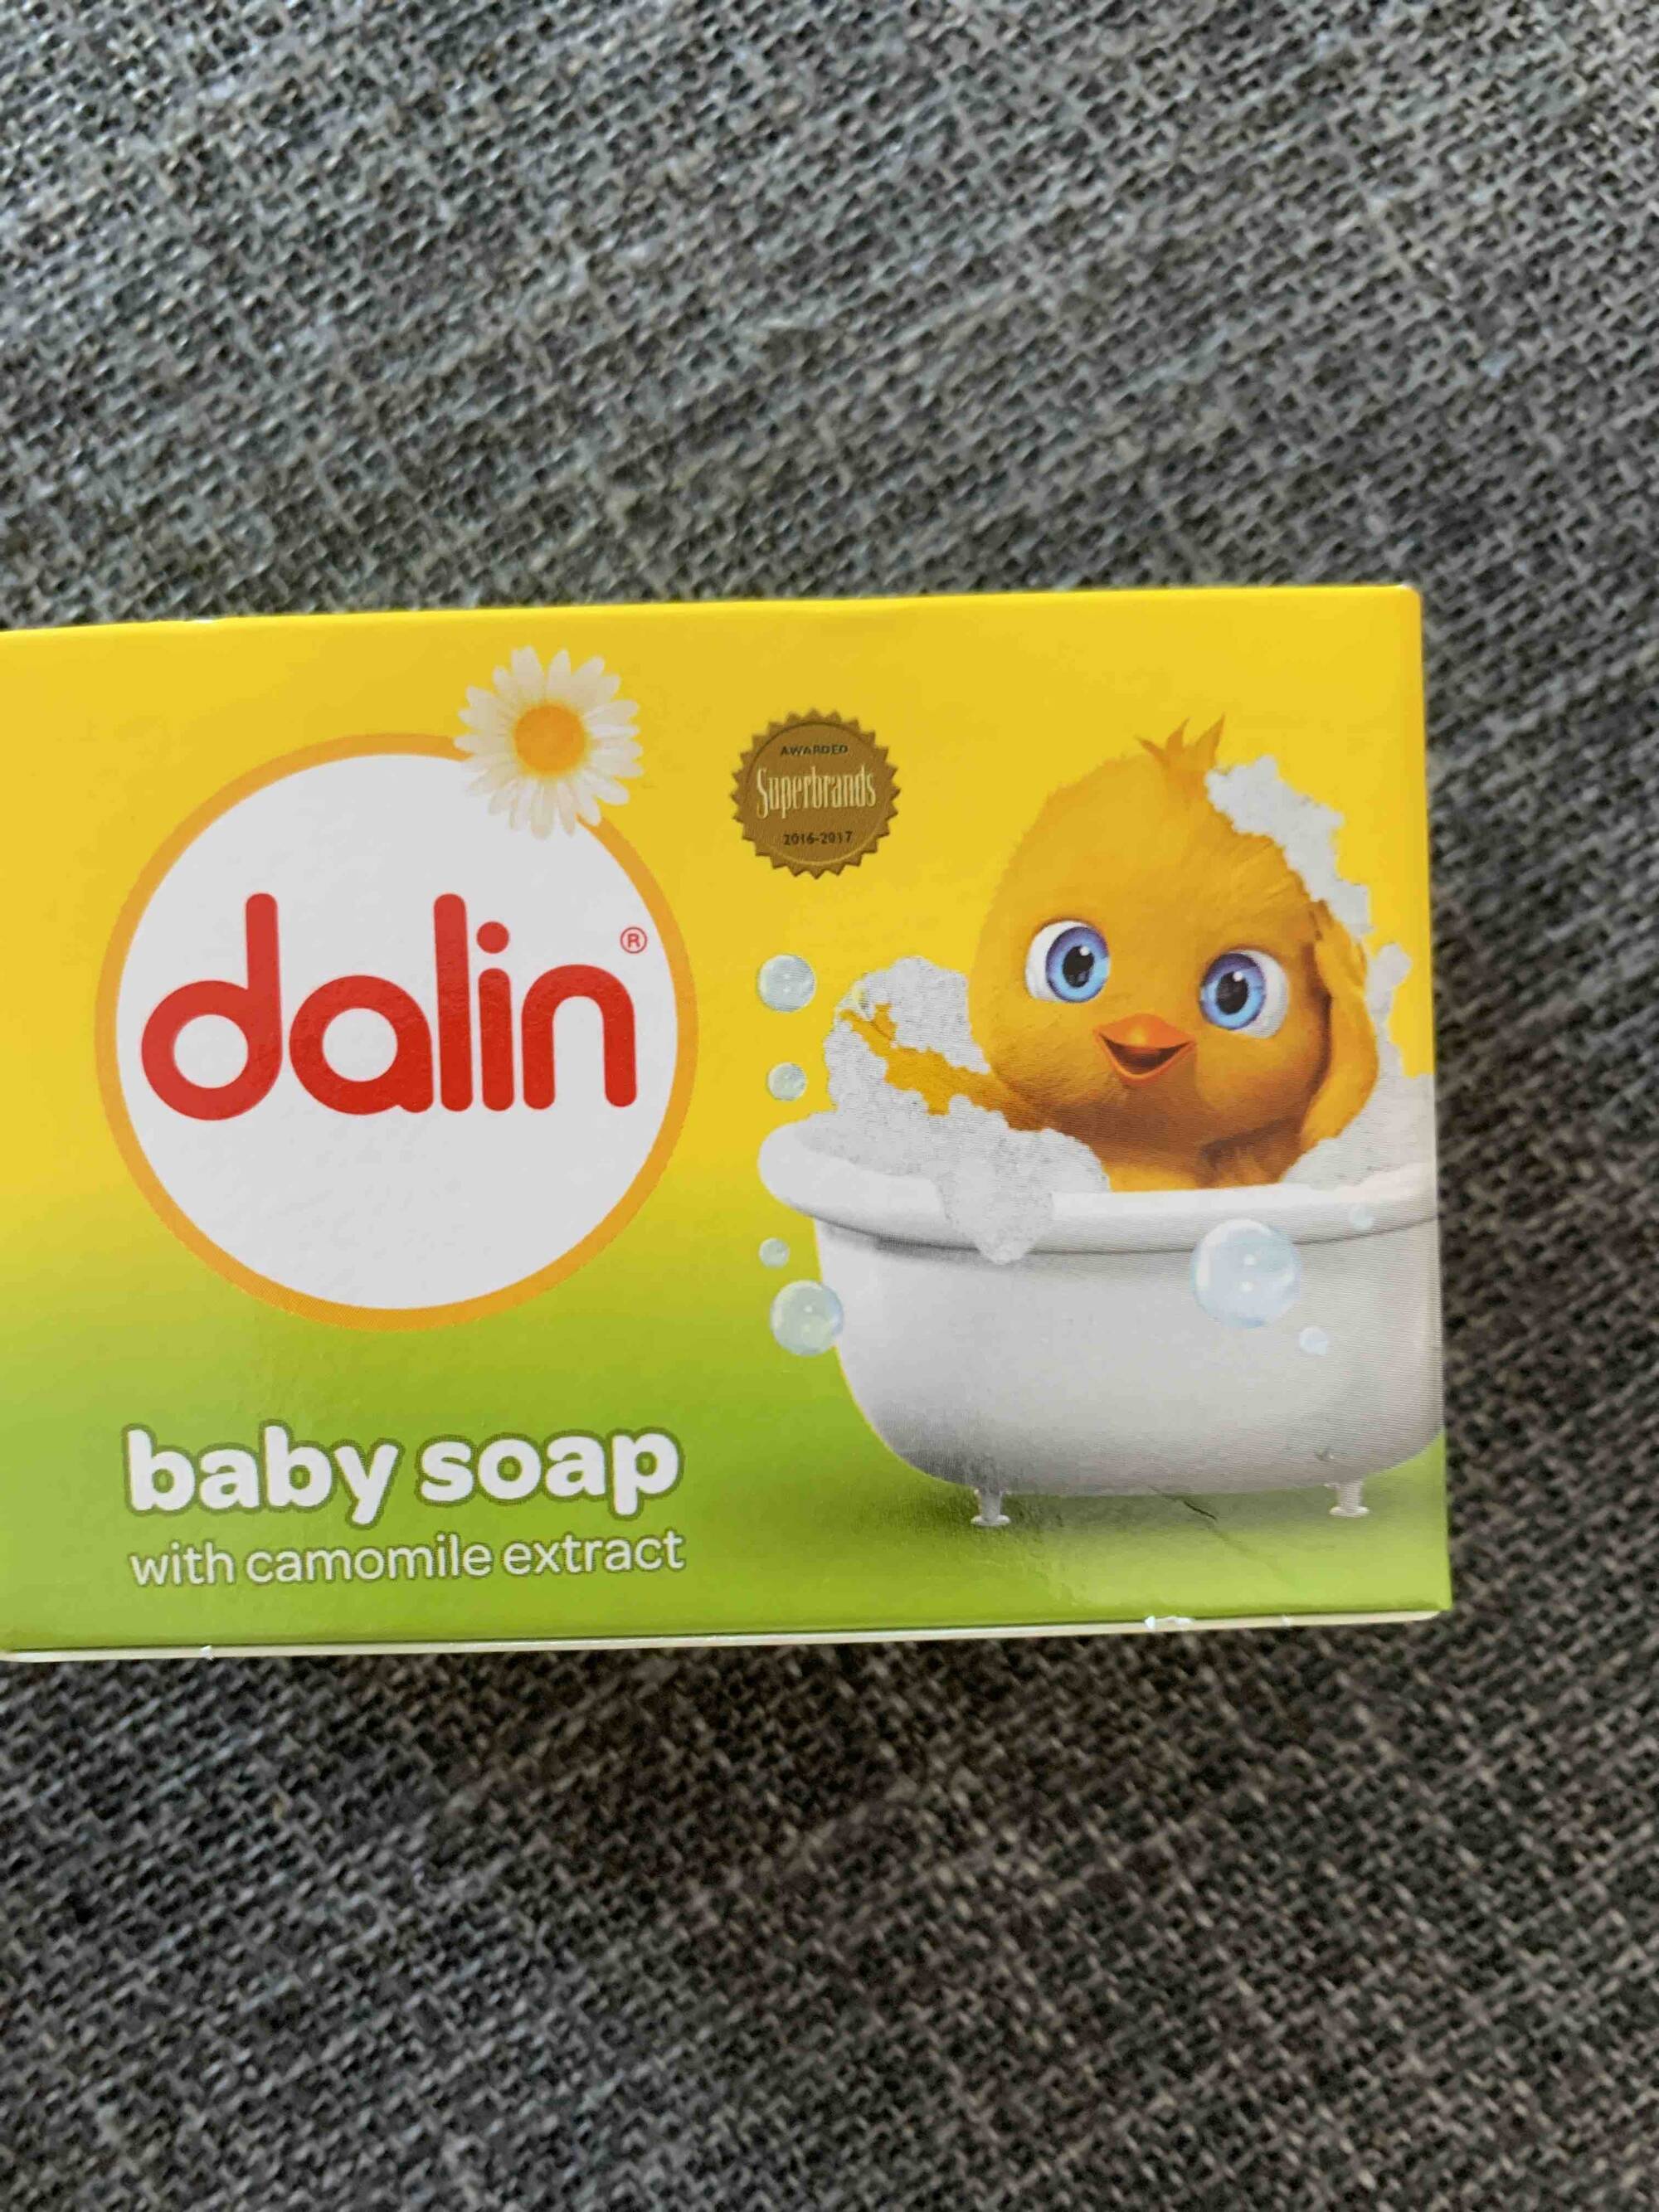 DALIN - Baby soap with camomile extract